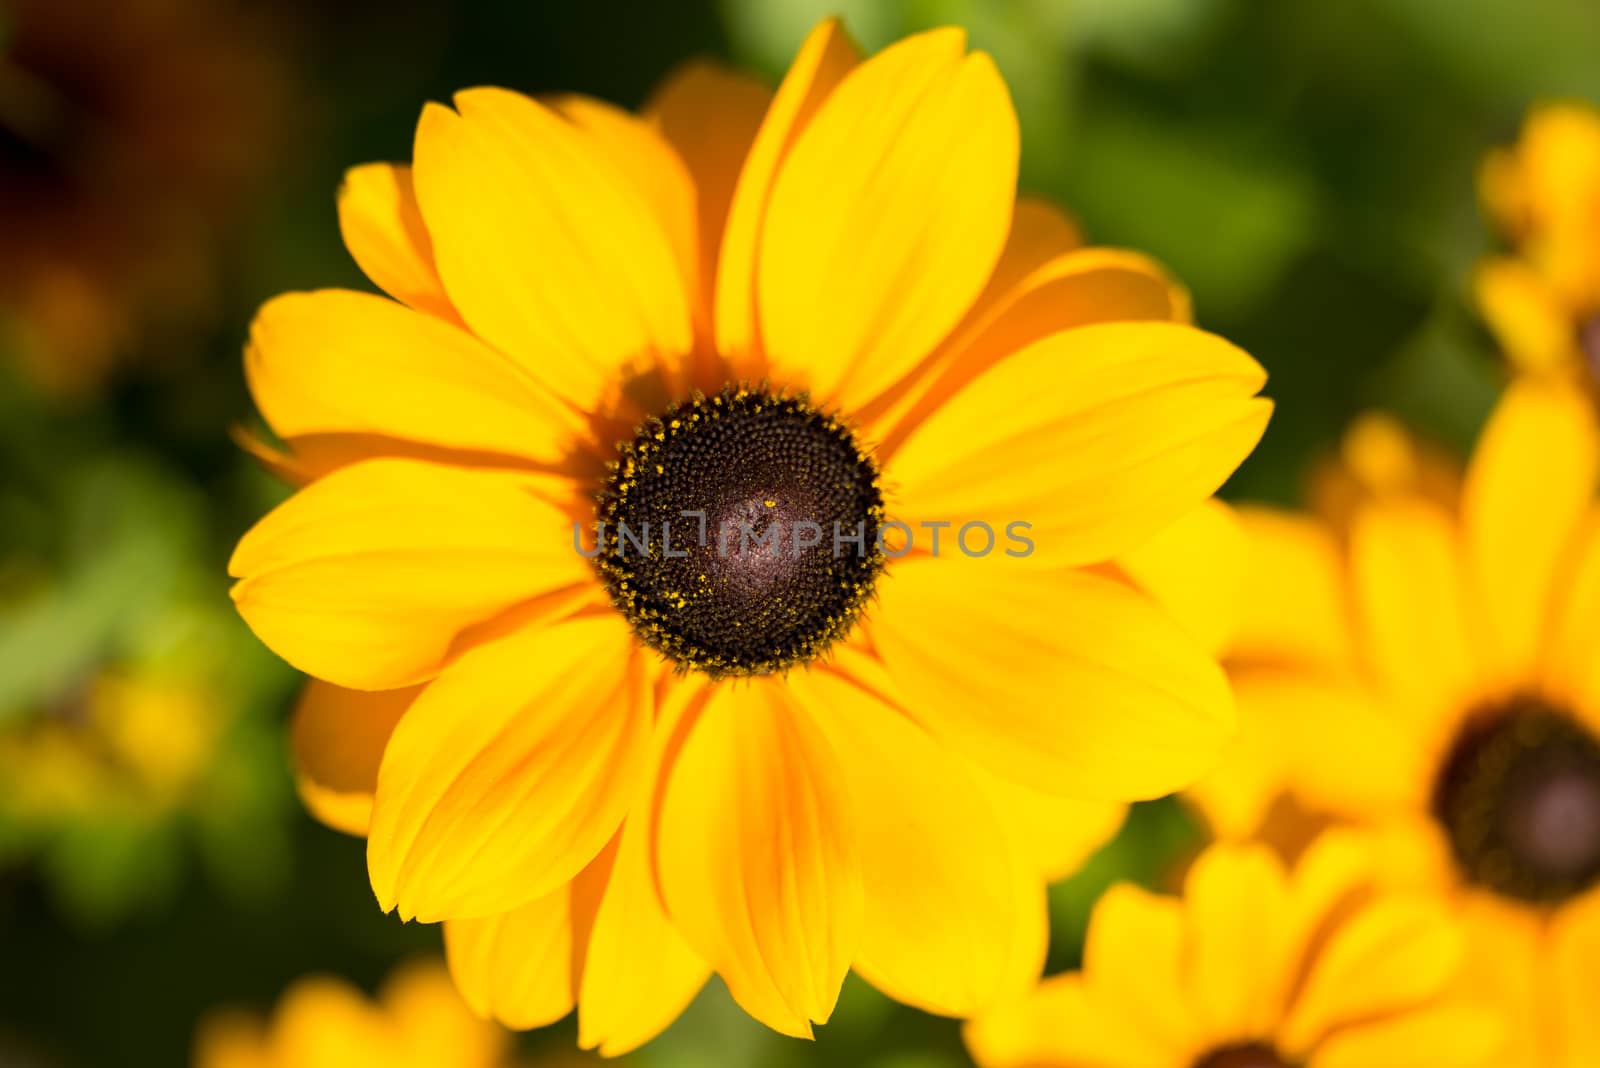 Close-up portrait of a yellow blossoming flower - summer flower seen in germany